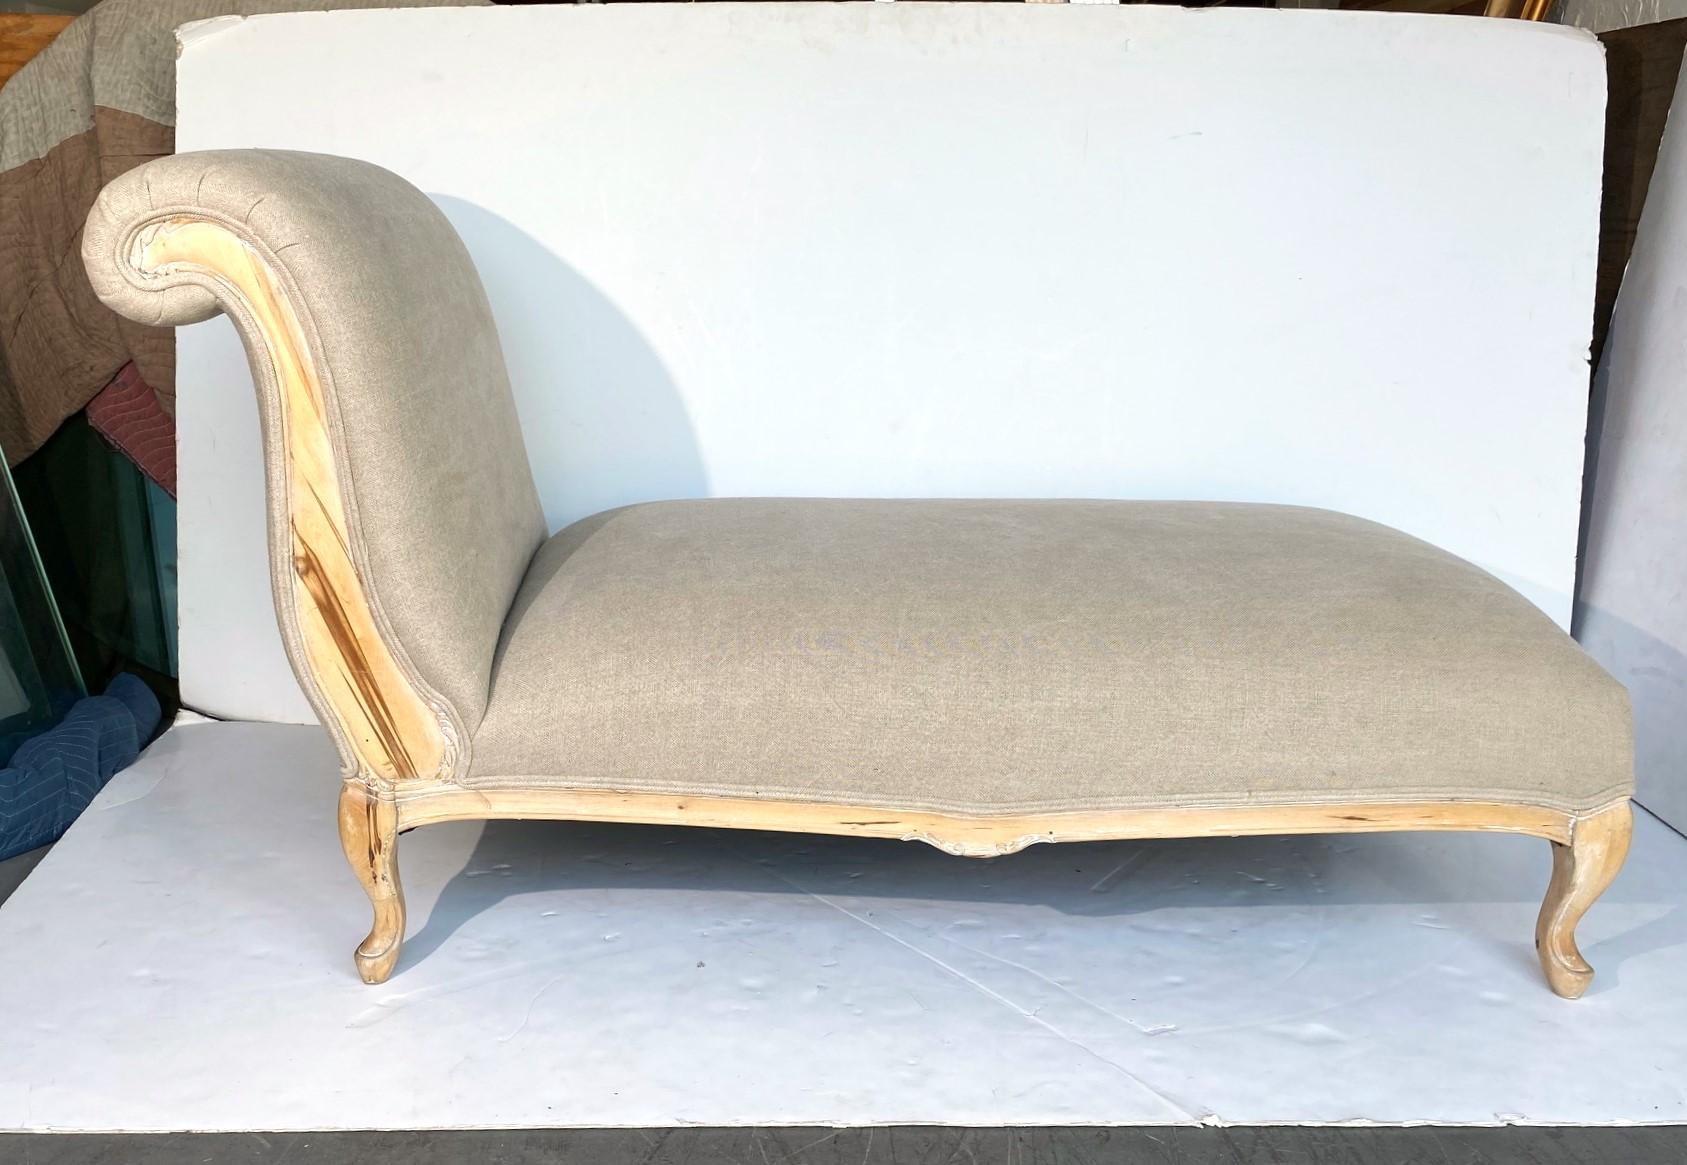 Louis XVI style chaise. New upholstery in linen.